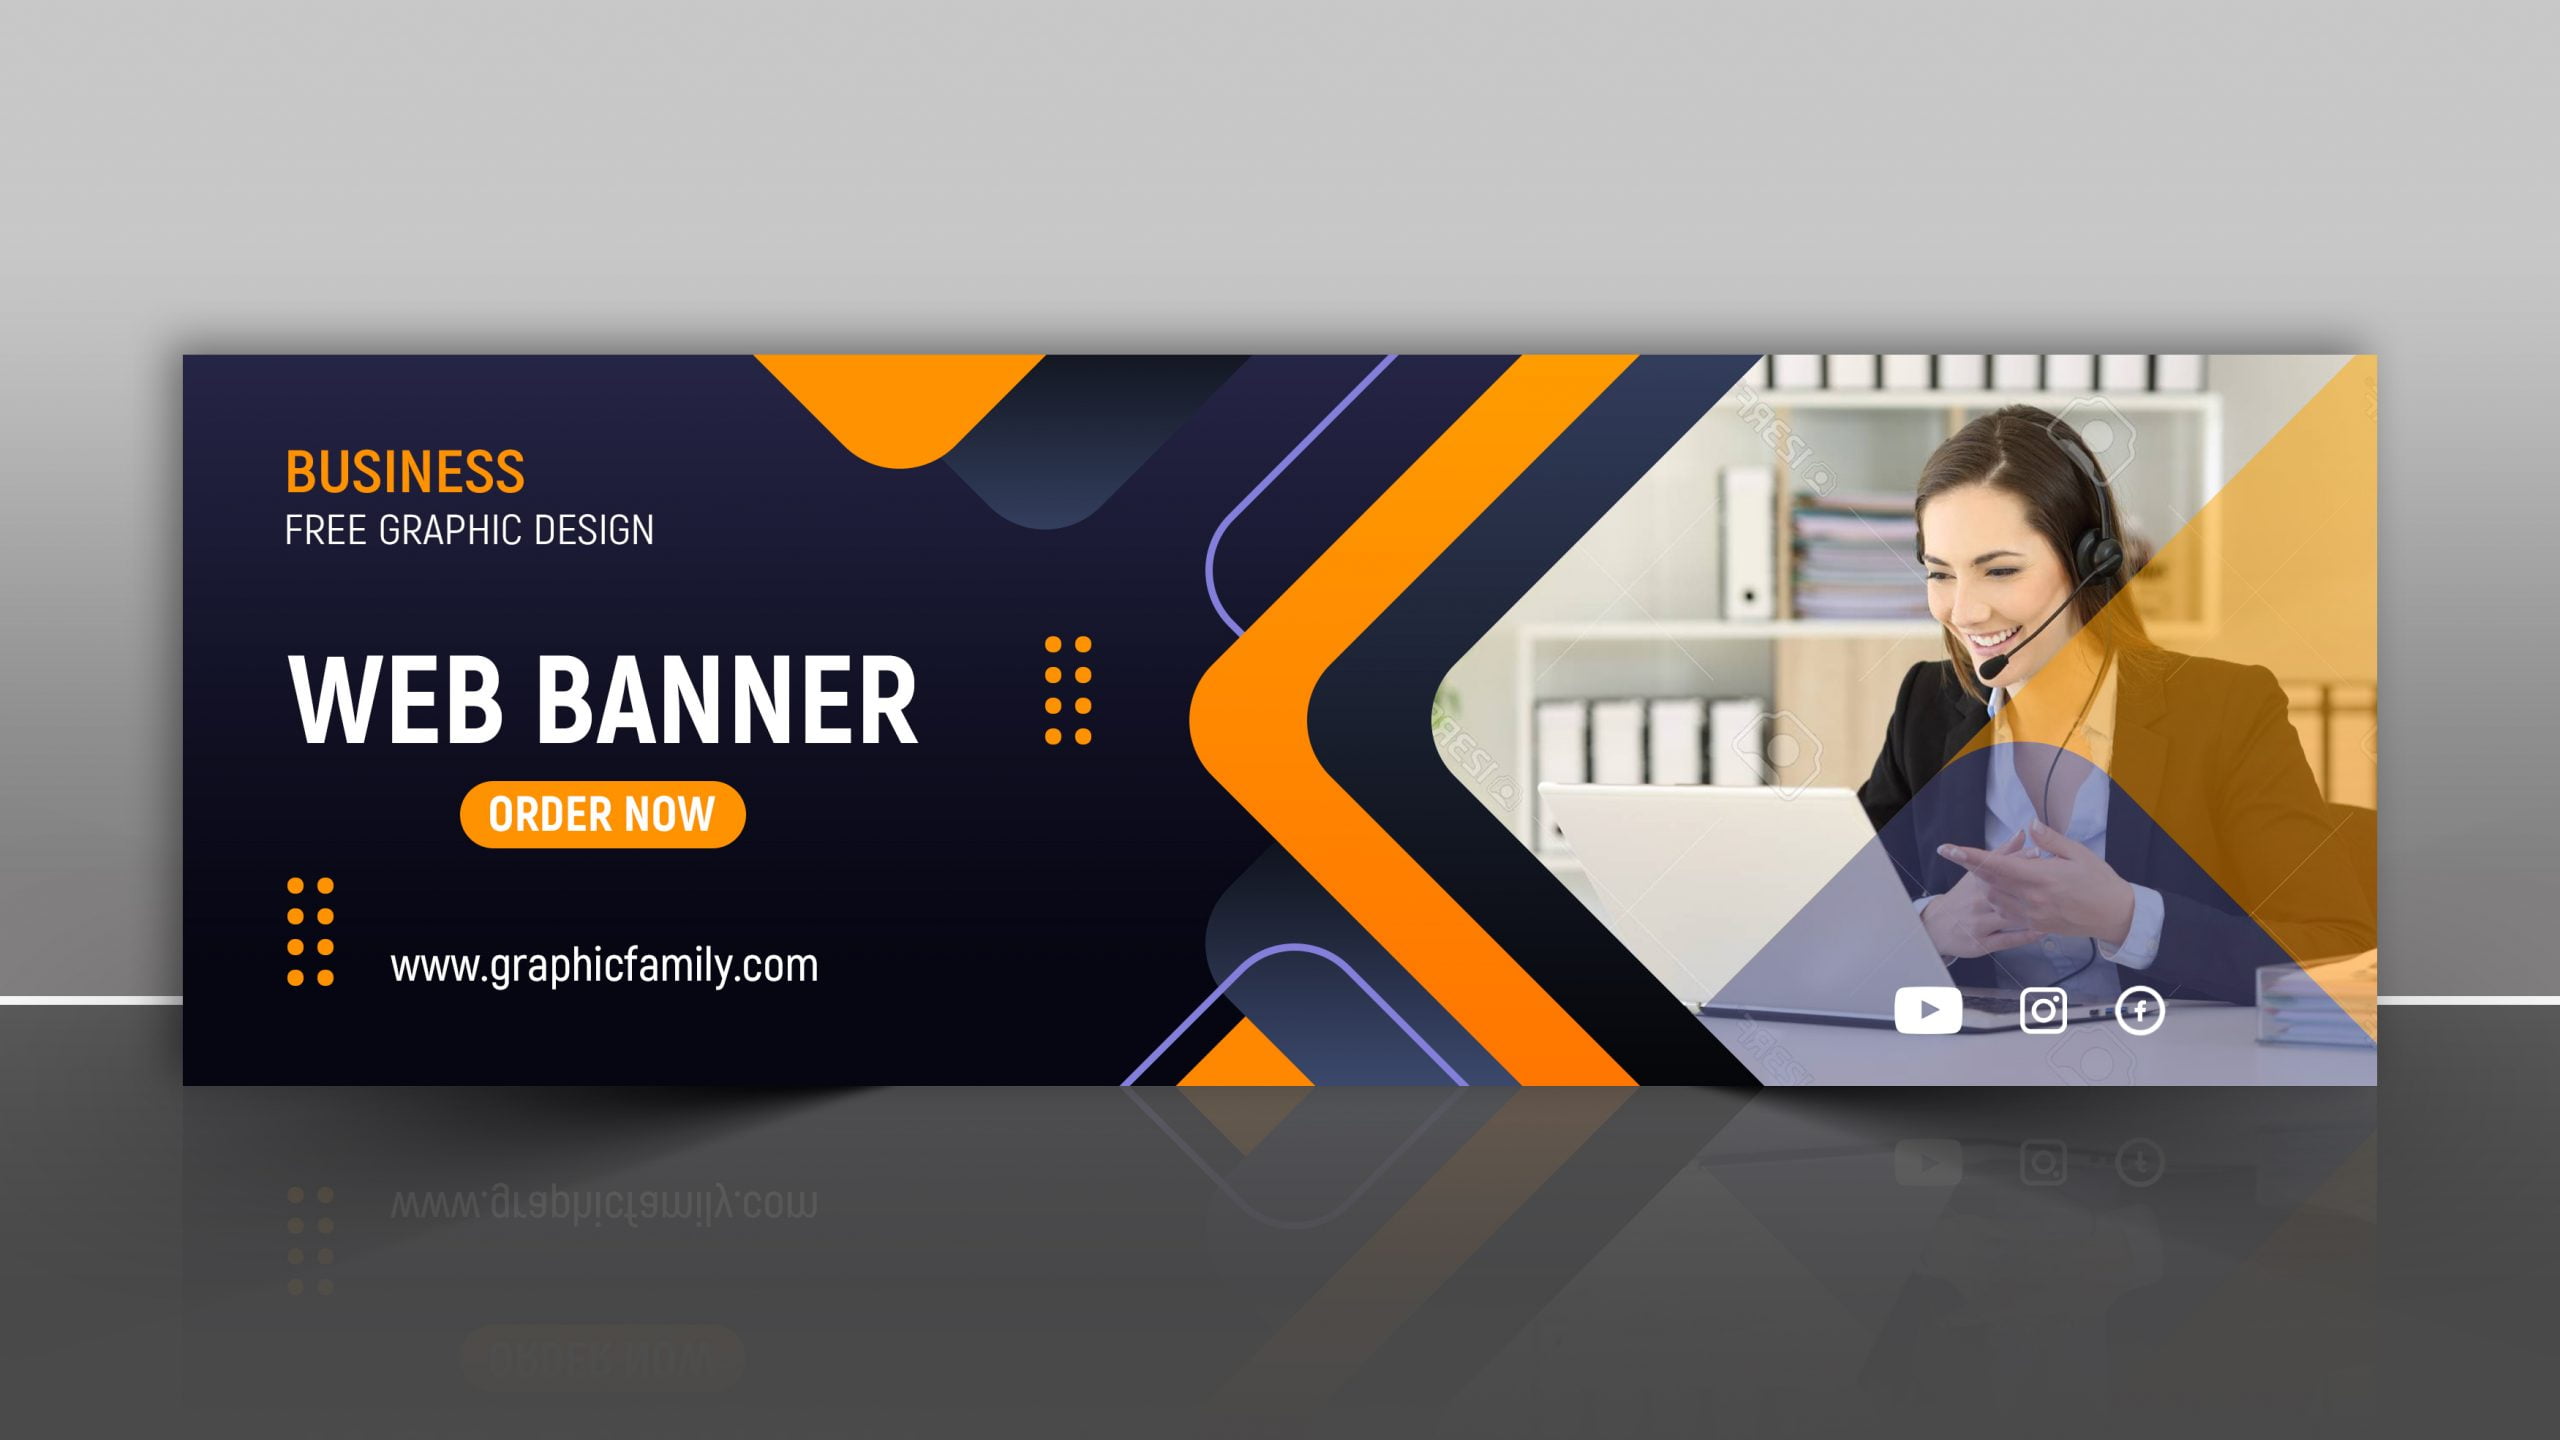 Corporate and Digital Business Marketing Promotion Horizontal Web Banner Design PSD – GraphicsFamily